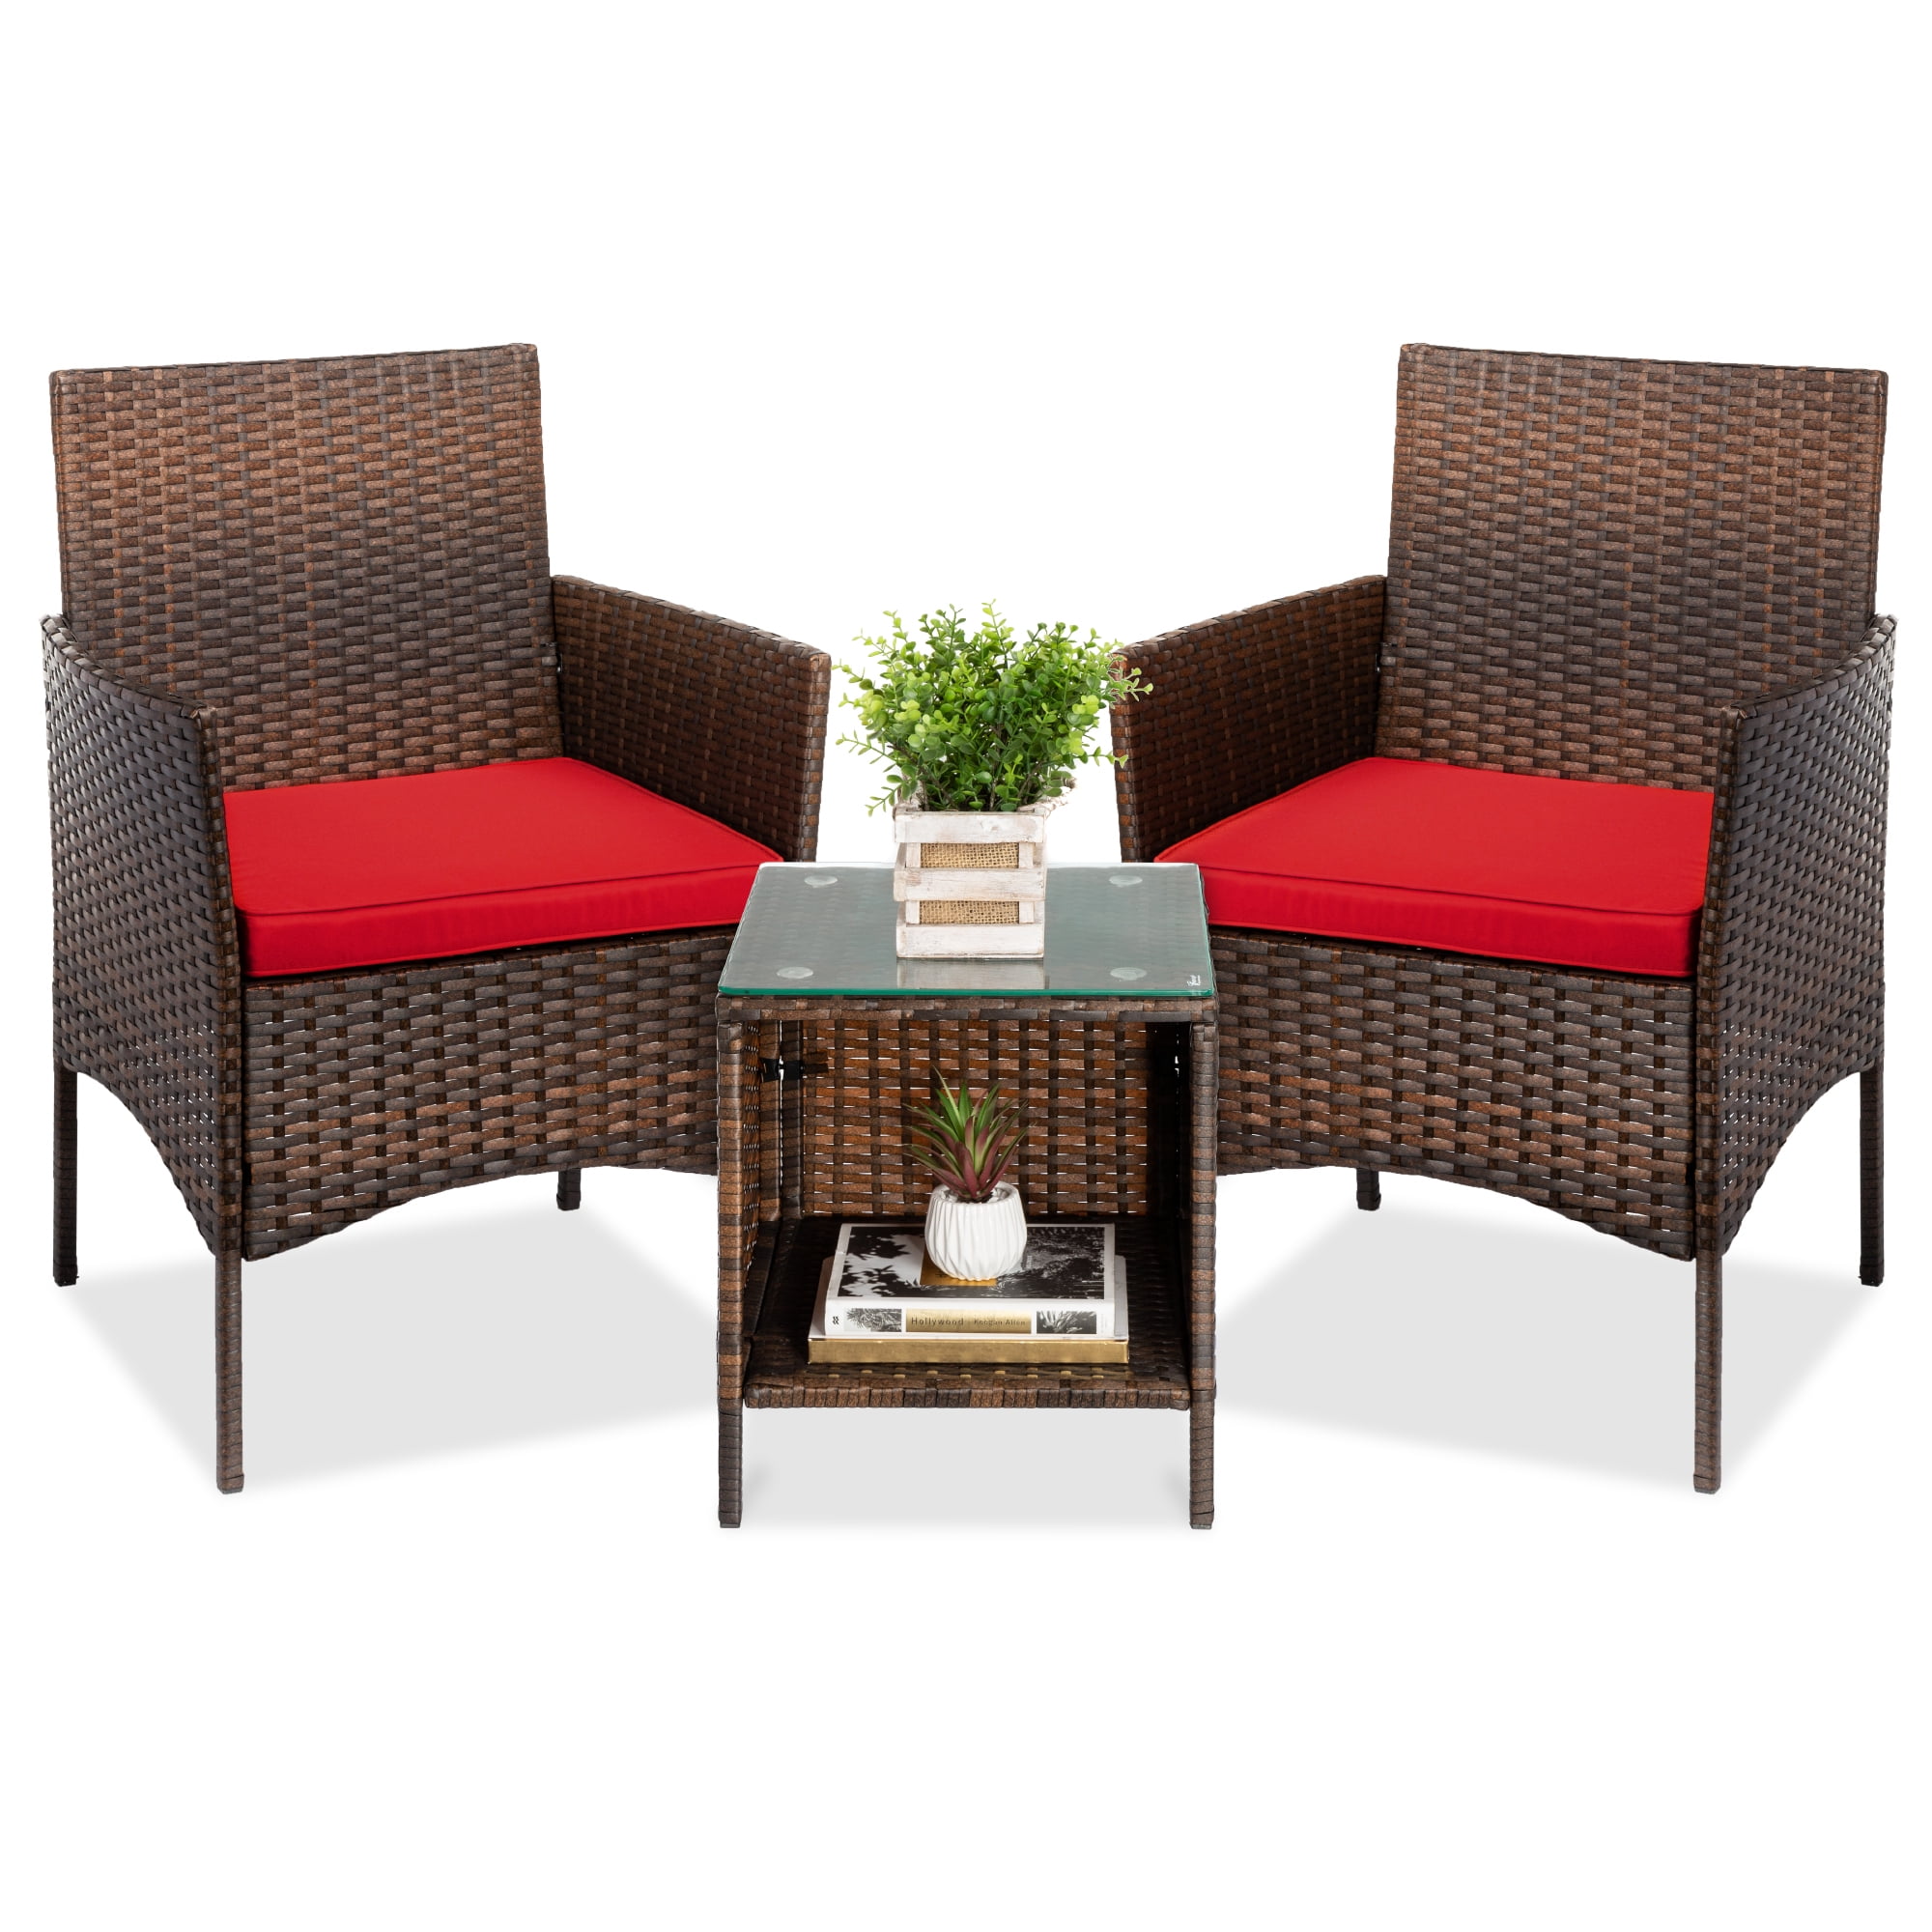 3 PCS Cushioned Outdoor Wicker Patio Set Garden Conversation Chair Seat W/Table 